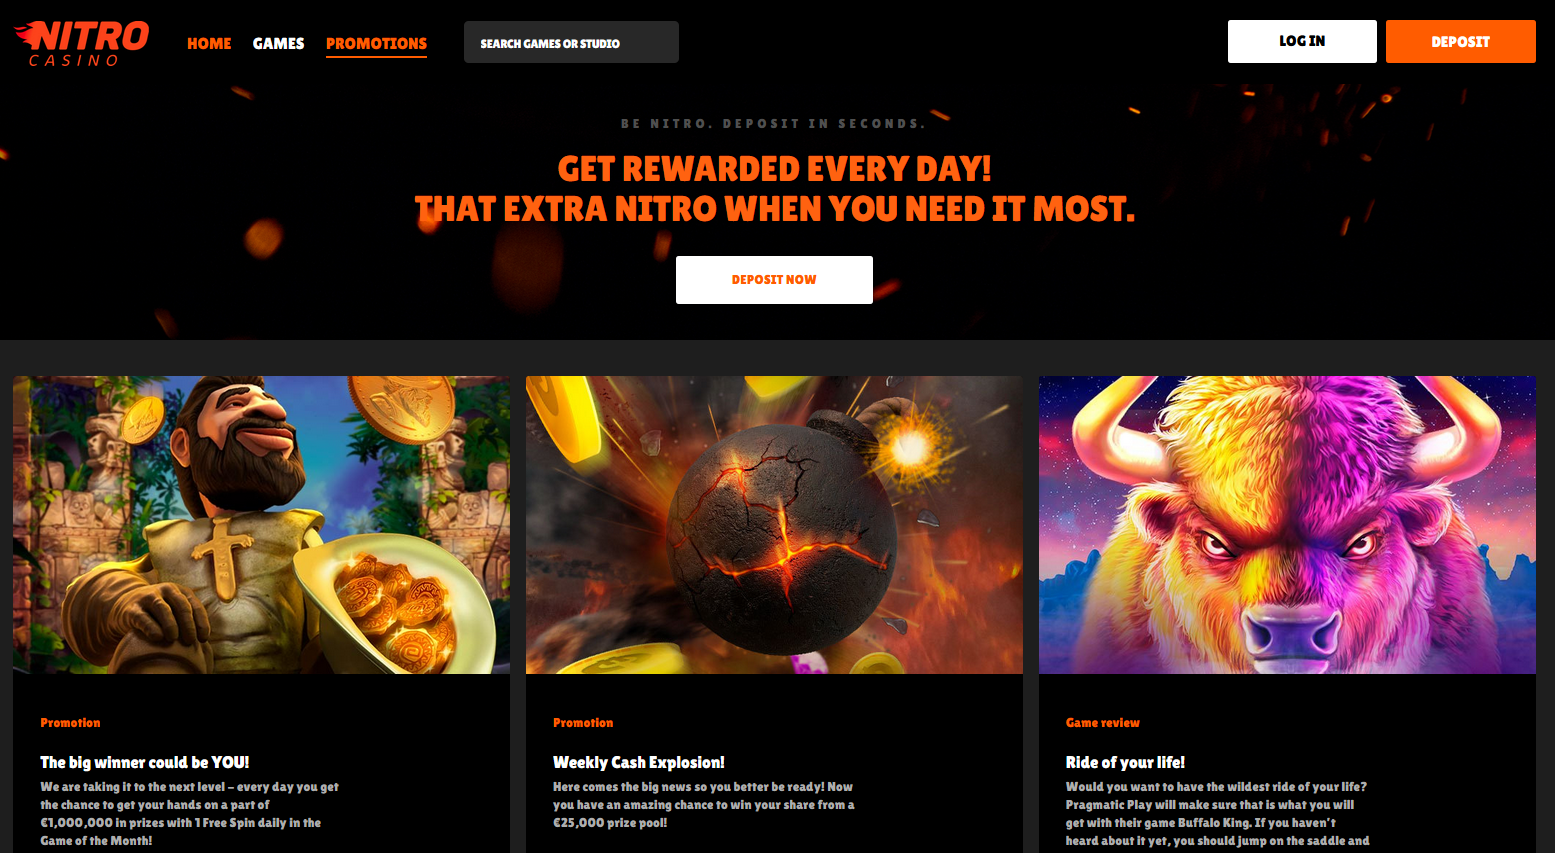 Daily rewards, no registration, payouts in minutes.